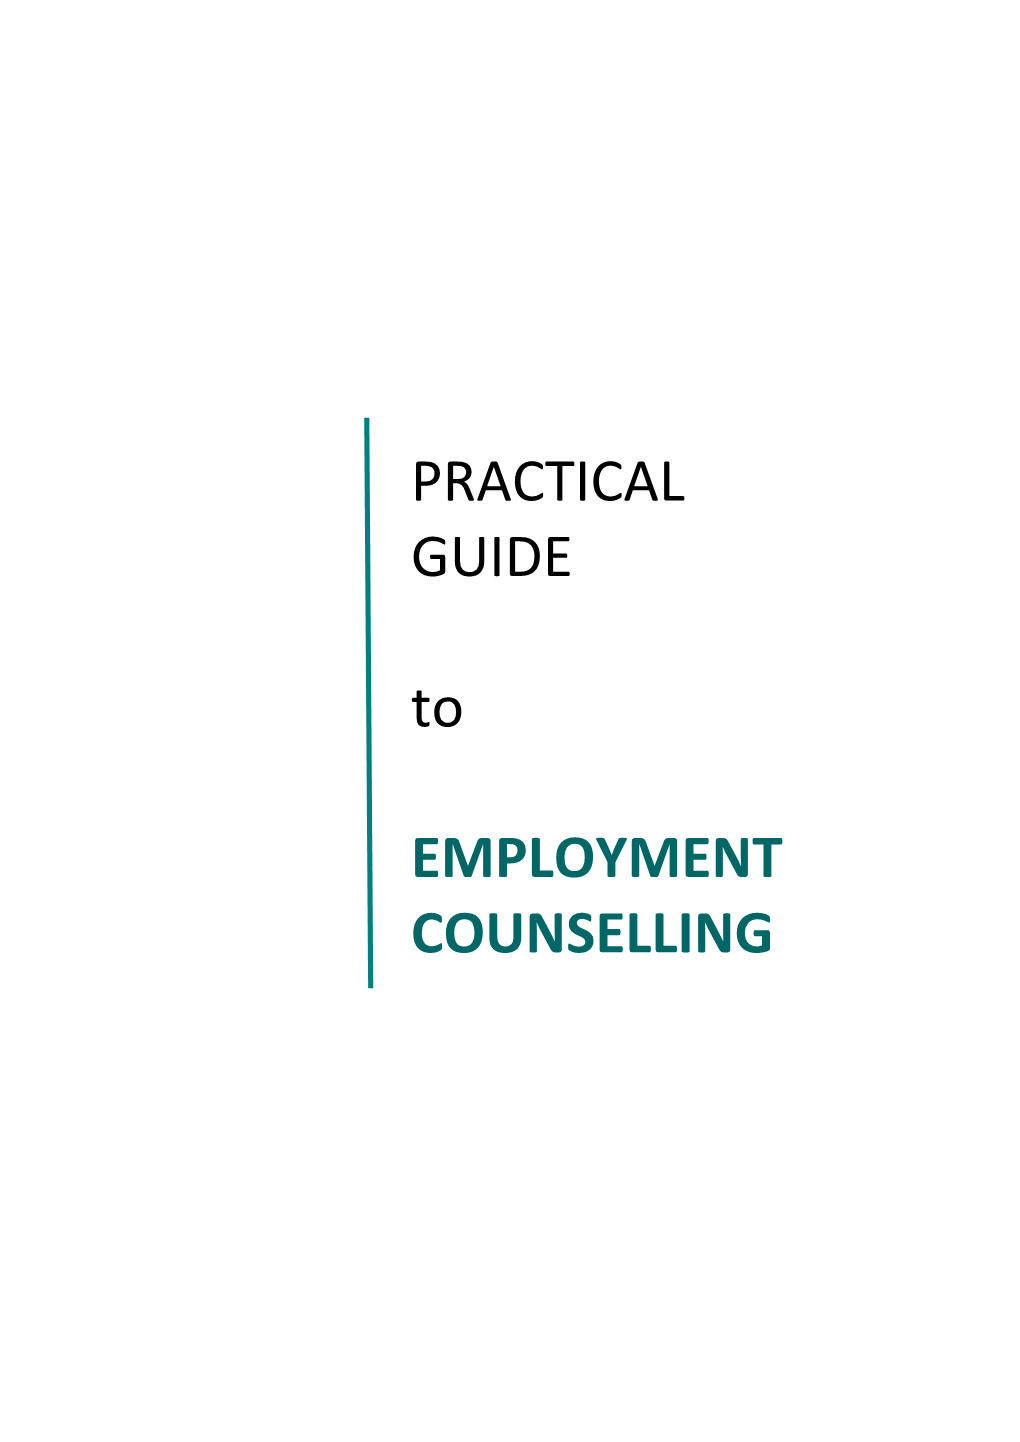 Practical Guide to Employment Counselling